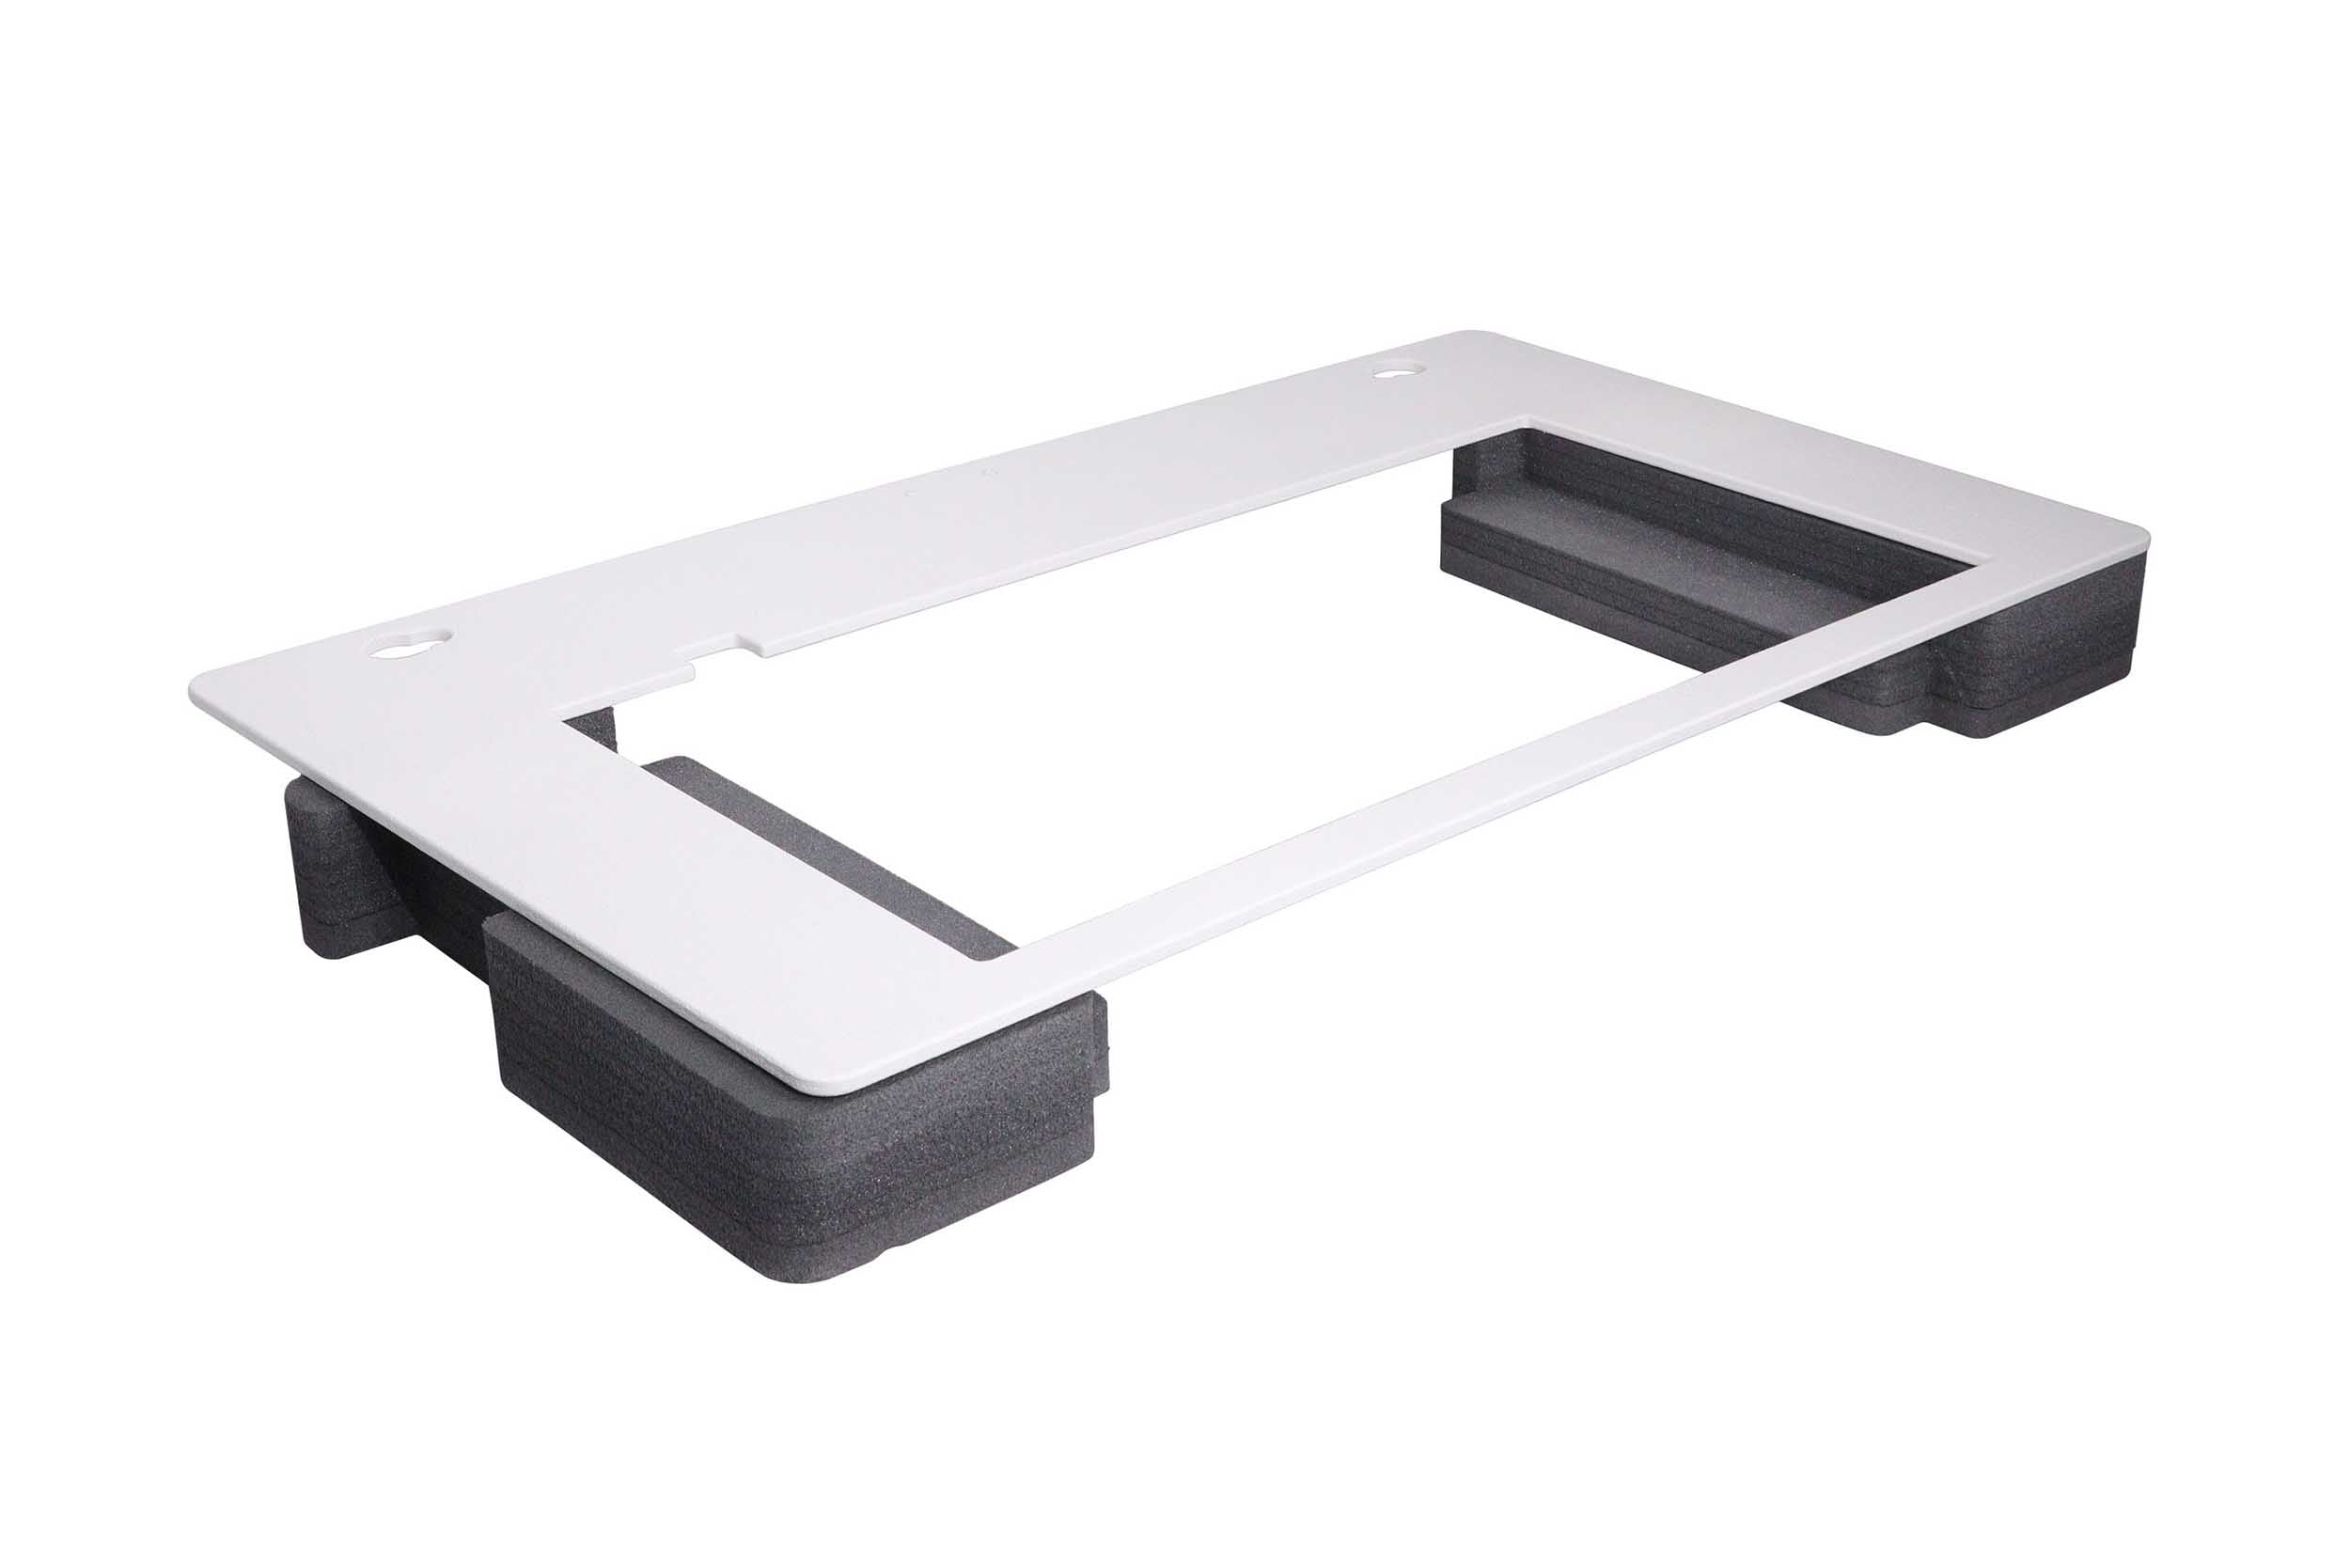 PROX XZF-DJ DDJ800WHPLATE Control Tower DJ Booth Interchangeable Top Plate - White by ProX Cases